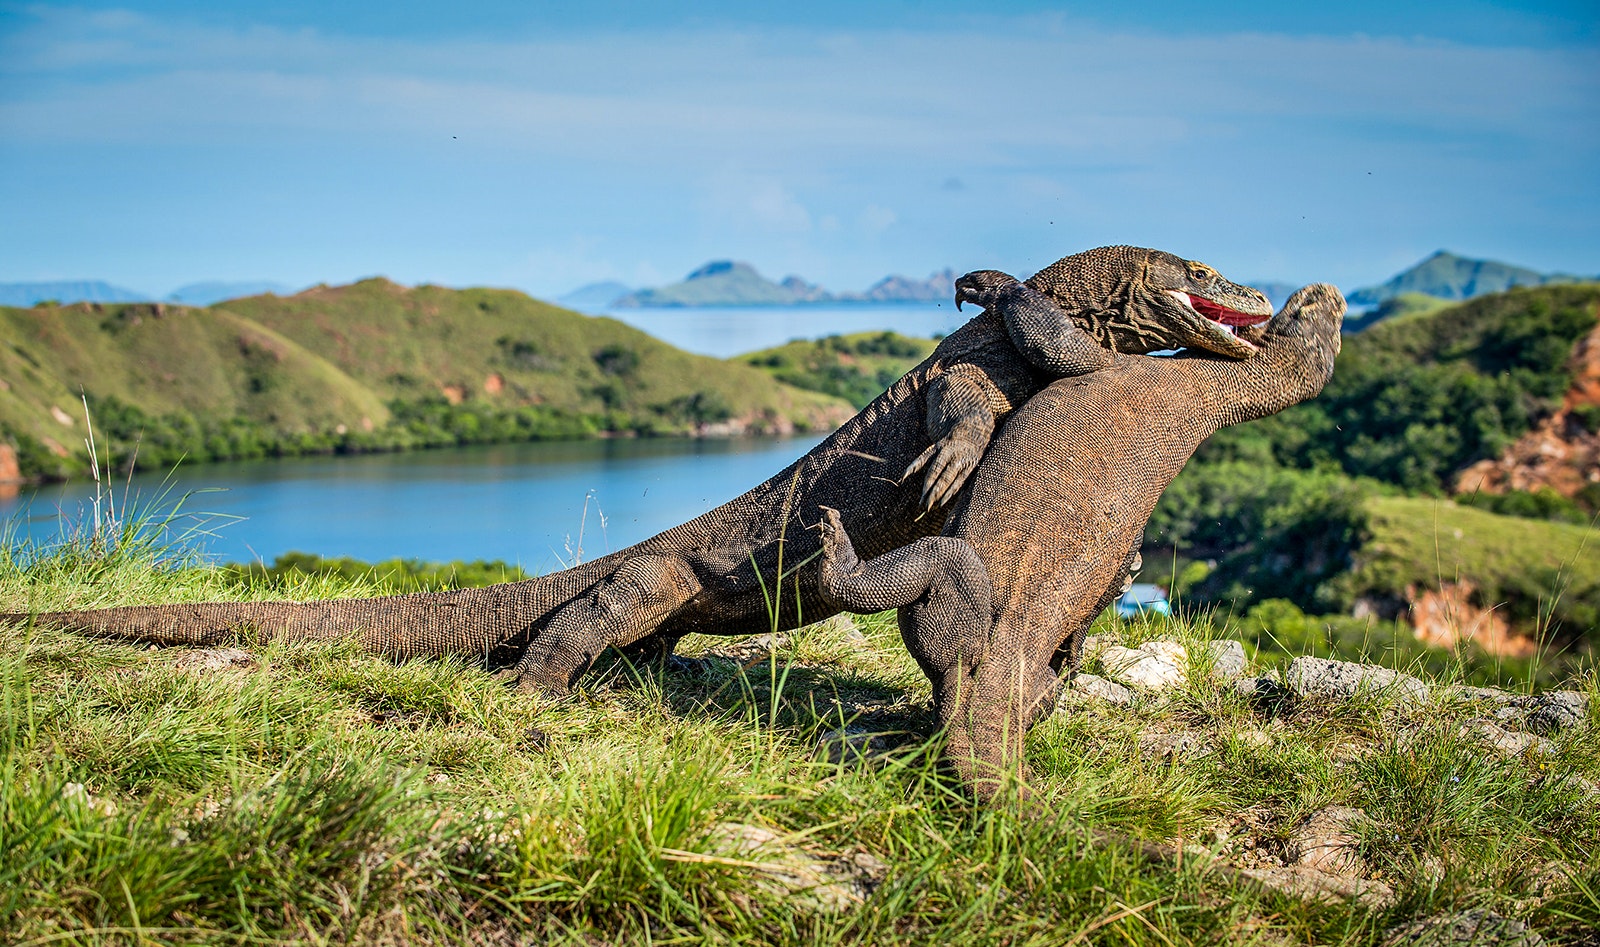 Two Komodo dragons fight on Rinca island, with mountains and coastline visible in the background. East Nusa Tenggara, Indonesia.